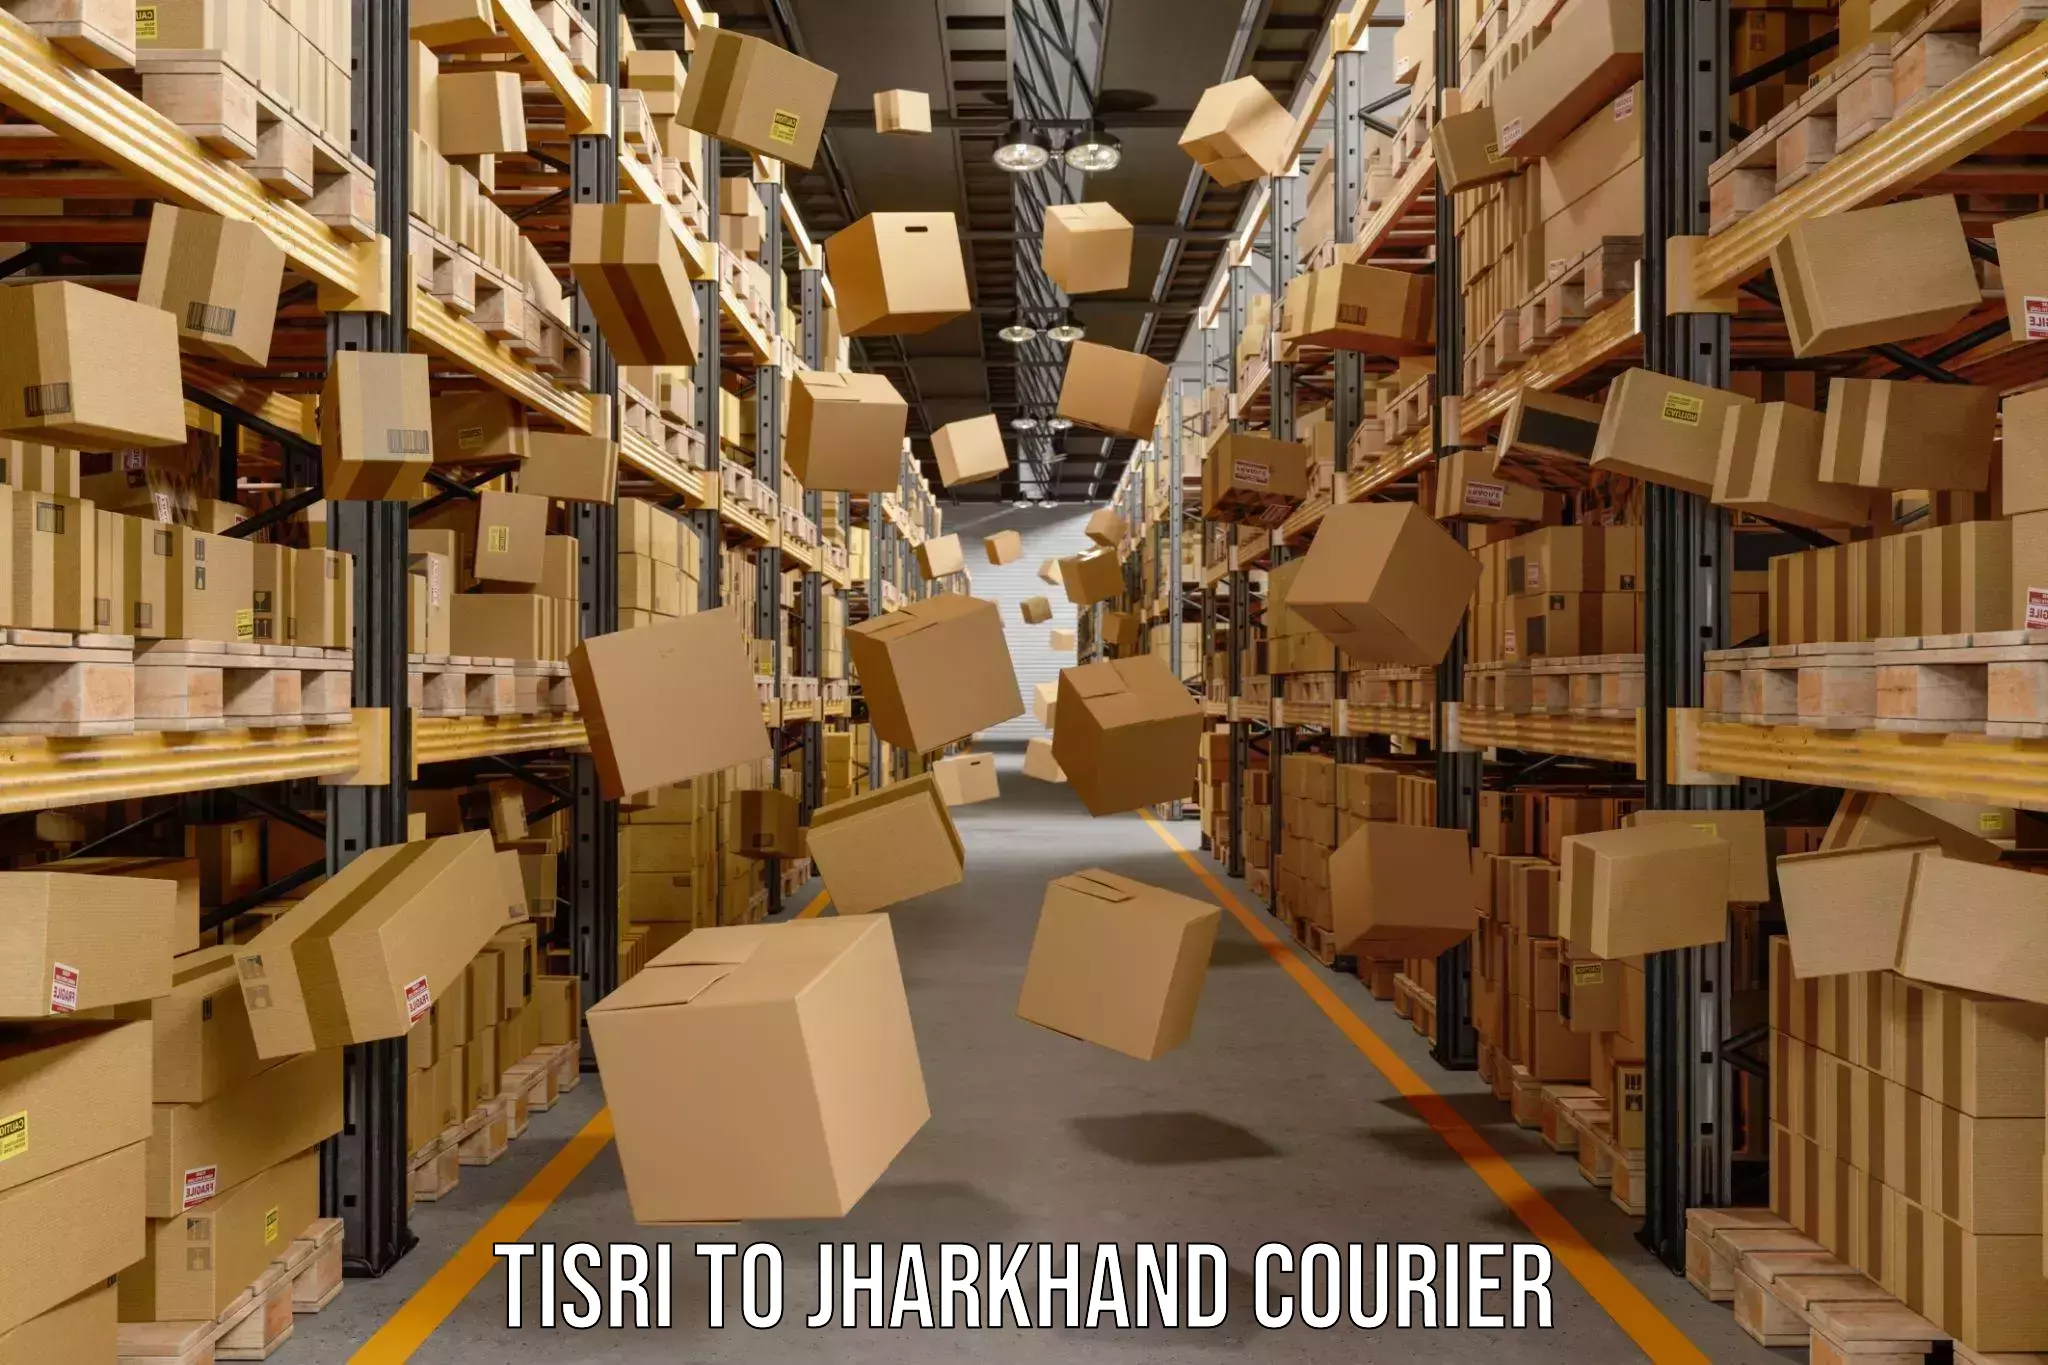 Express courier capabilities in Tisri to Jharia